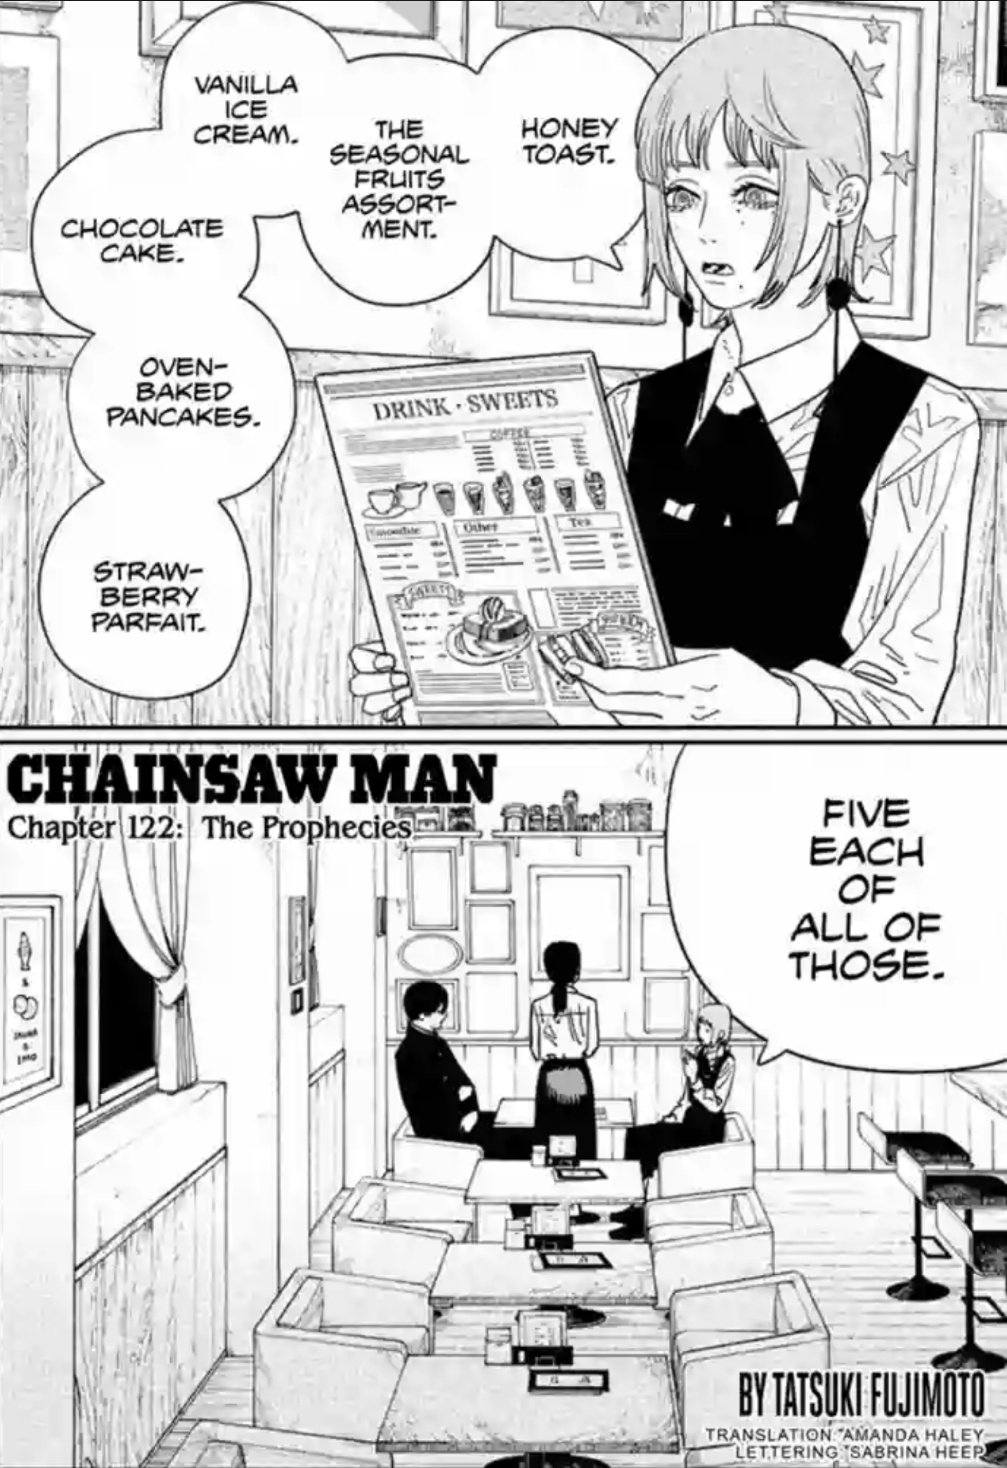 Twitter explodes as Chainsaw Man manga's latest chapter unveils the echoes  of Chu Chu by Maximum the Hormone